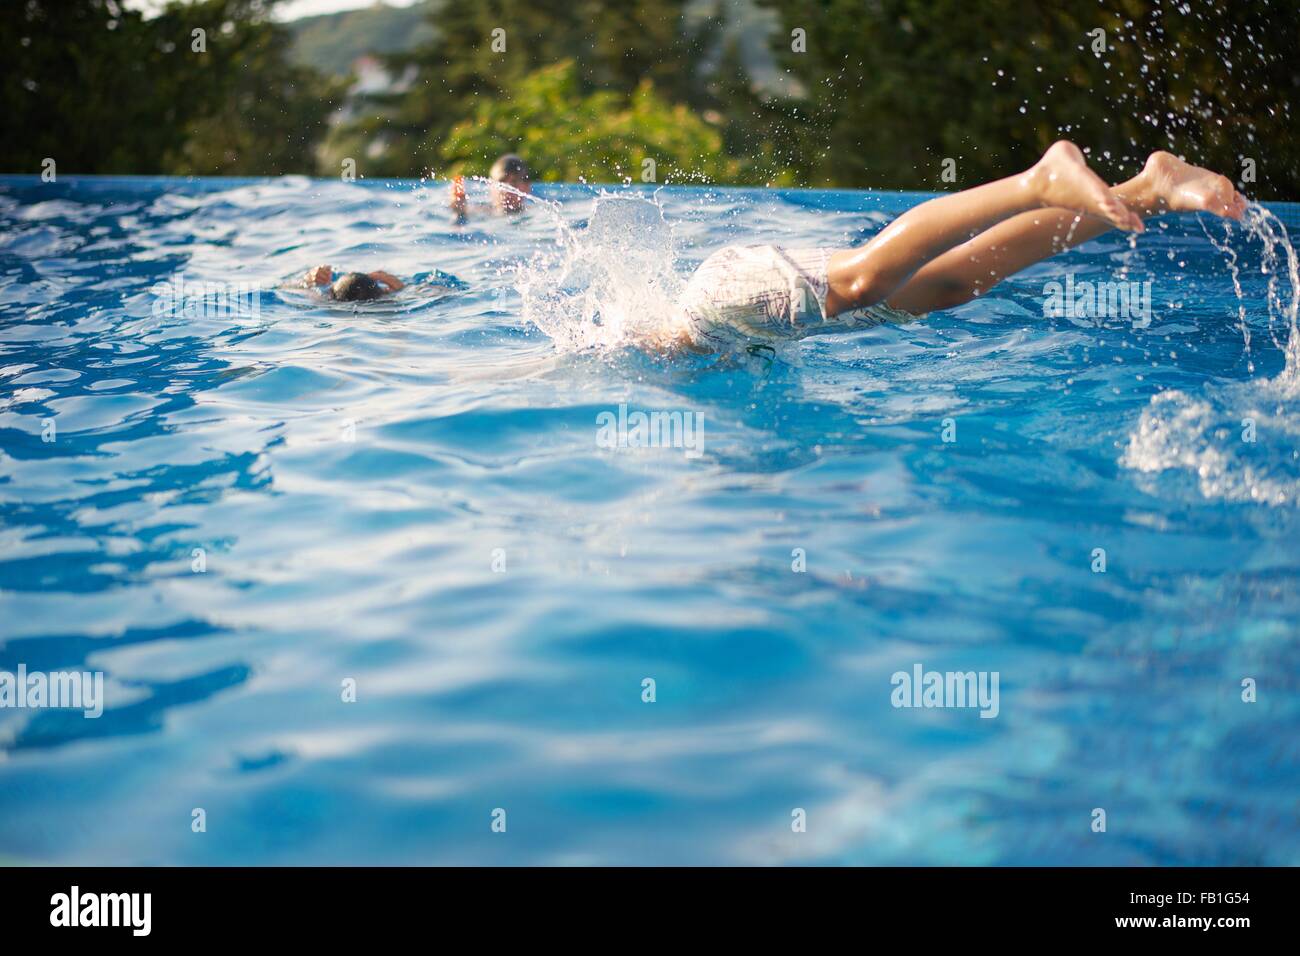 Boys diving into outdoor swimming pool Stock Photo